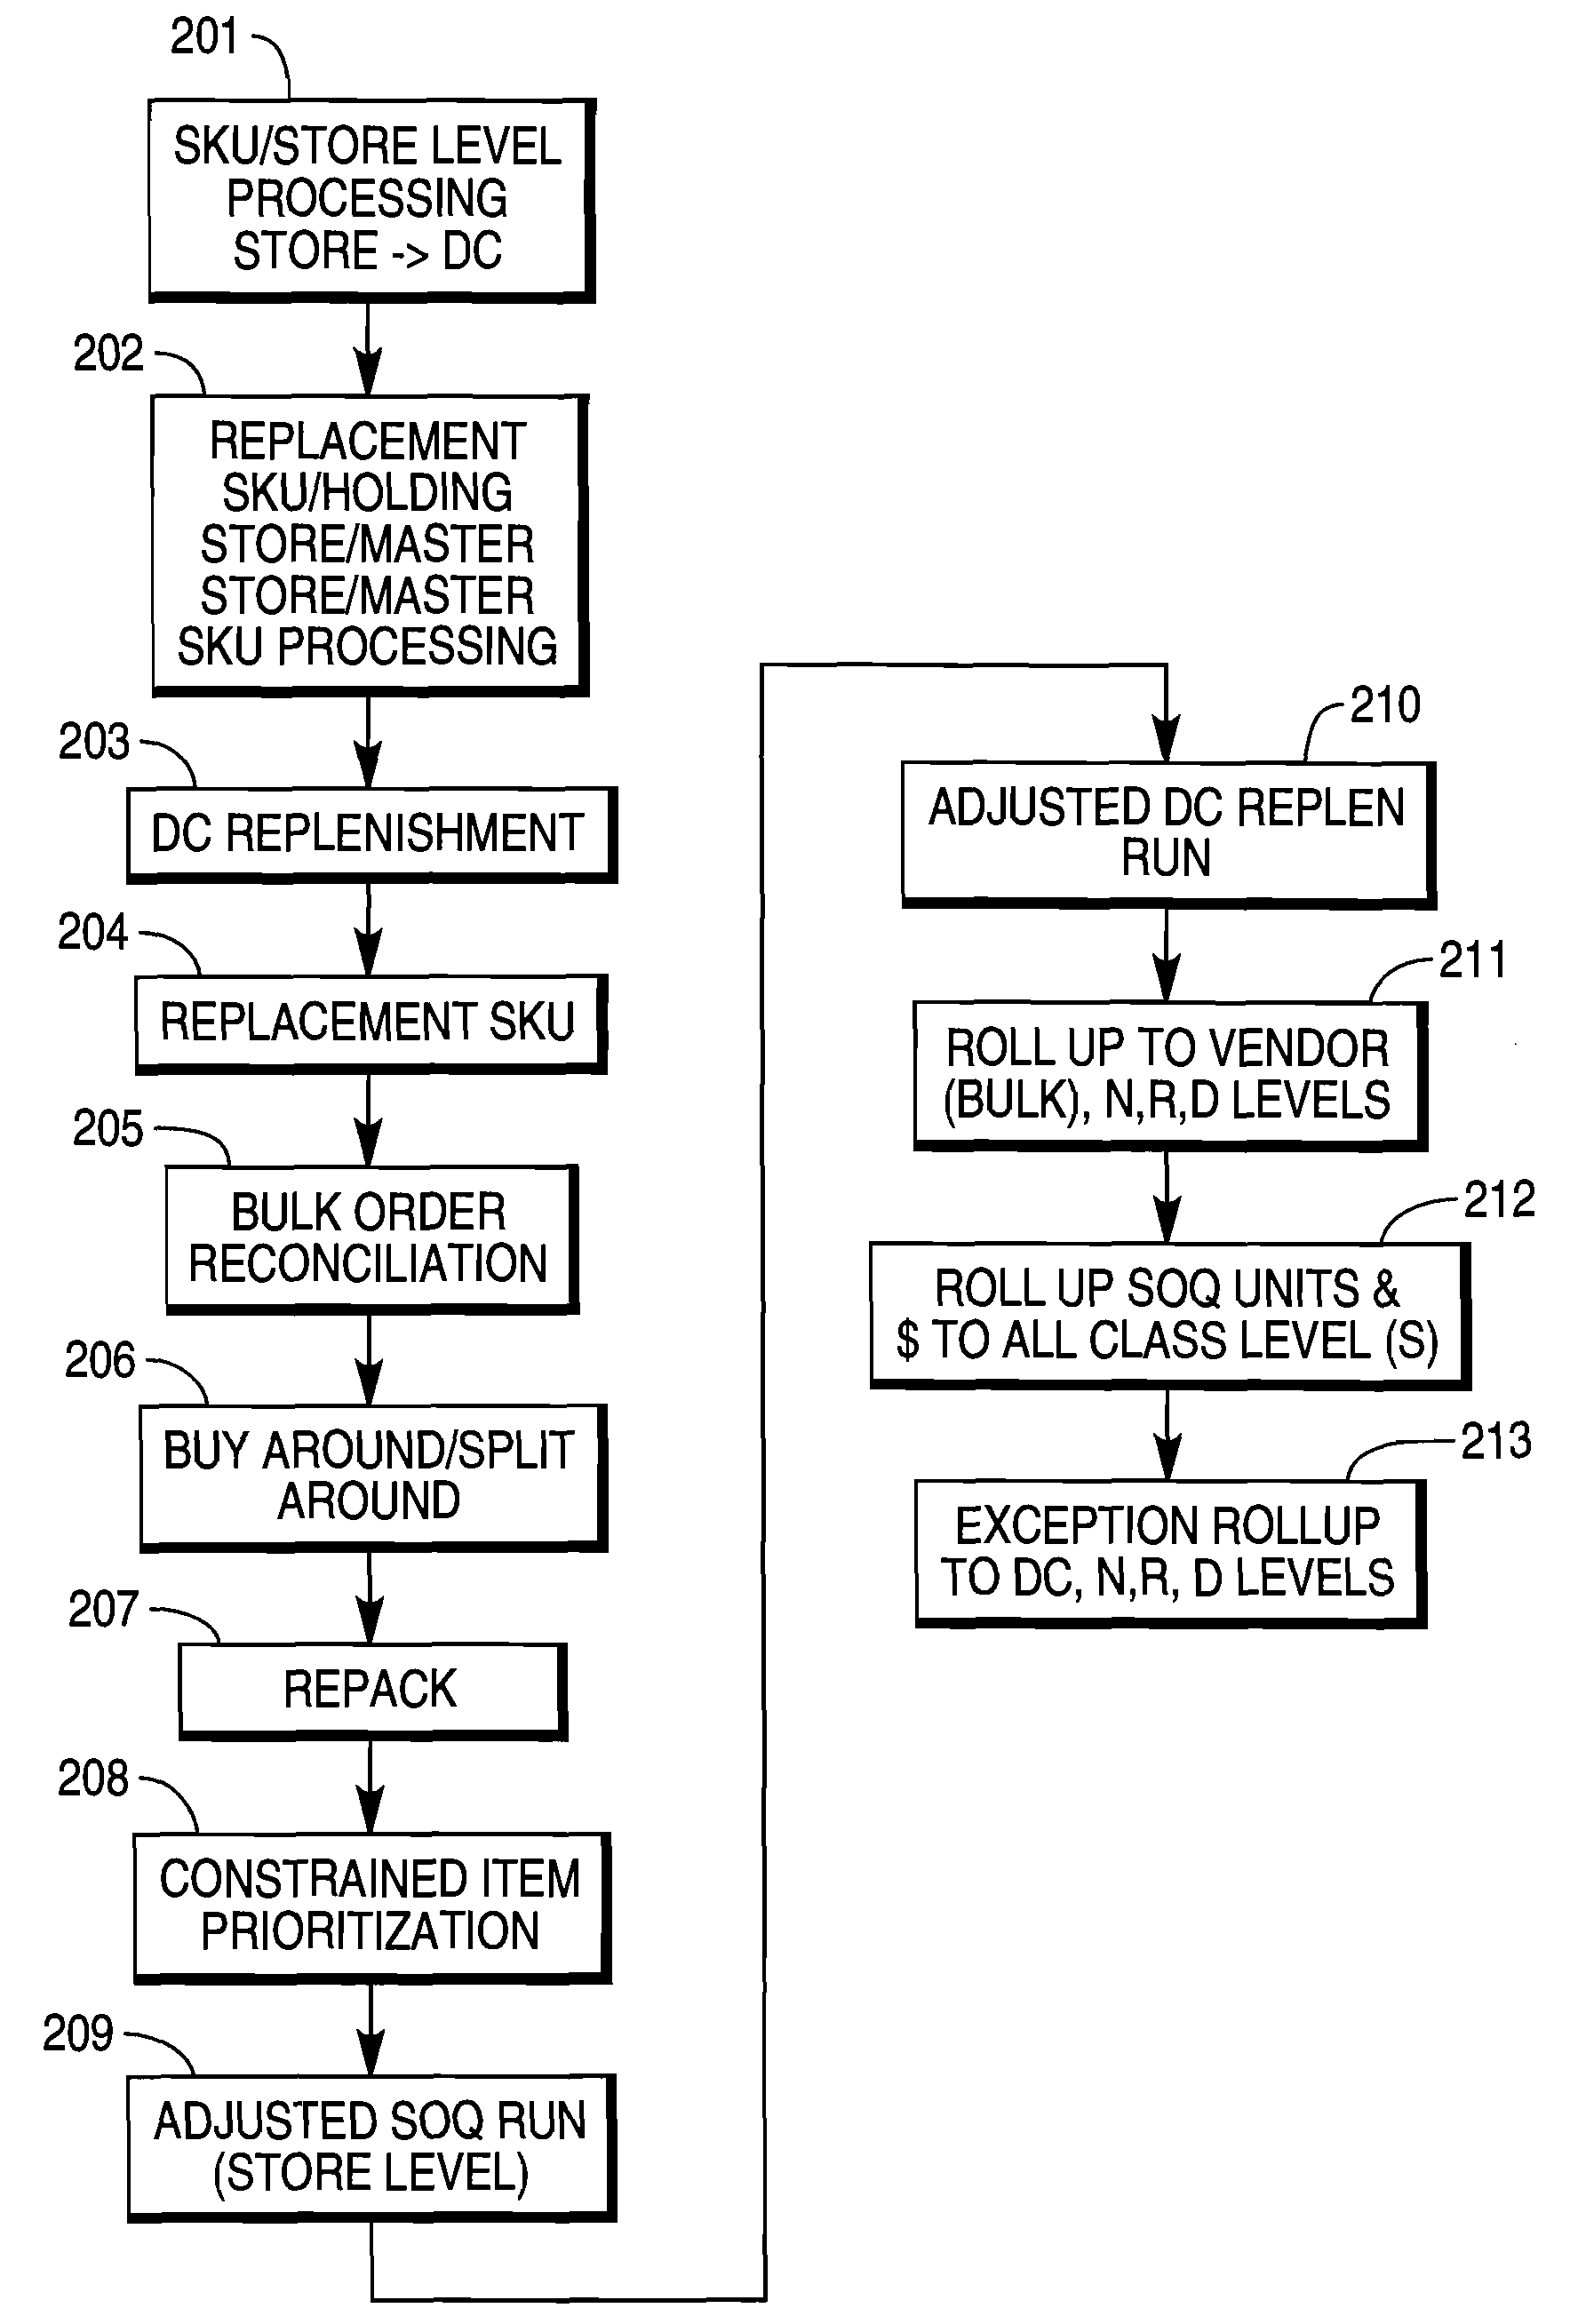 Managing distribution of constrained product inventory from a warehouse